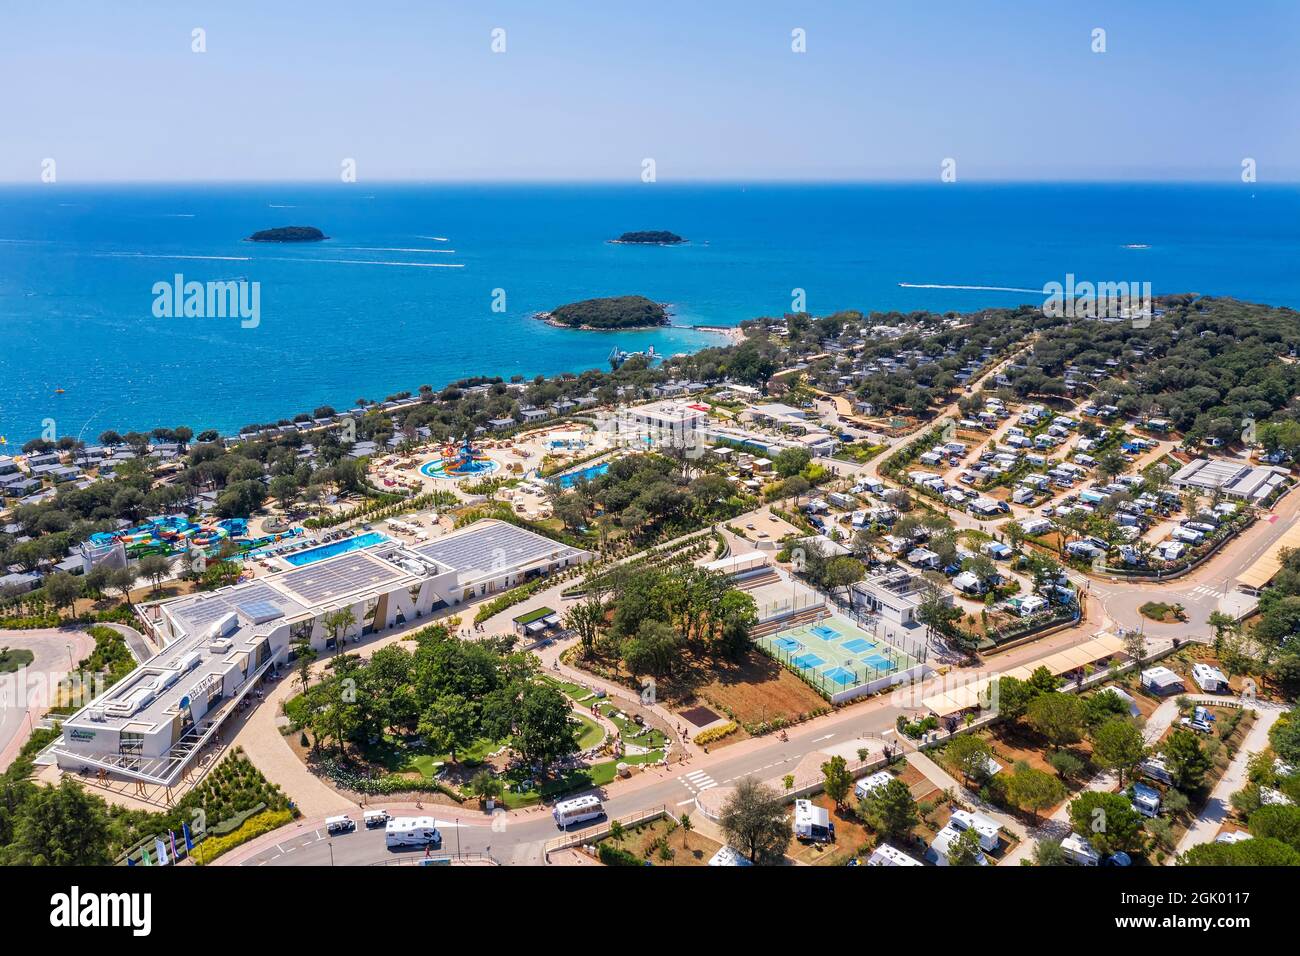 FUNTANA, CROATIA - JULY 31, 2021: An amazing aerial view of Istra Premium  Camping Resort, owned by Hotels and Resorts Valamar, surrounded by several  i Stock Photo - Alamy